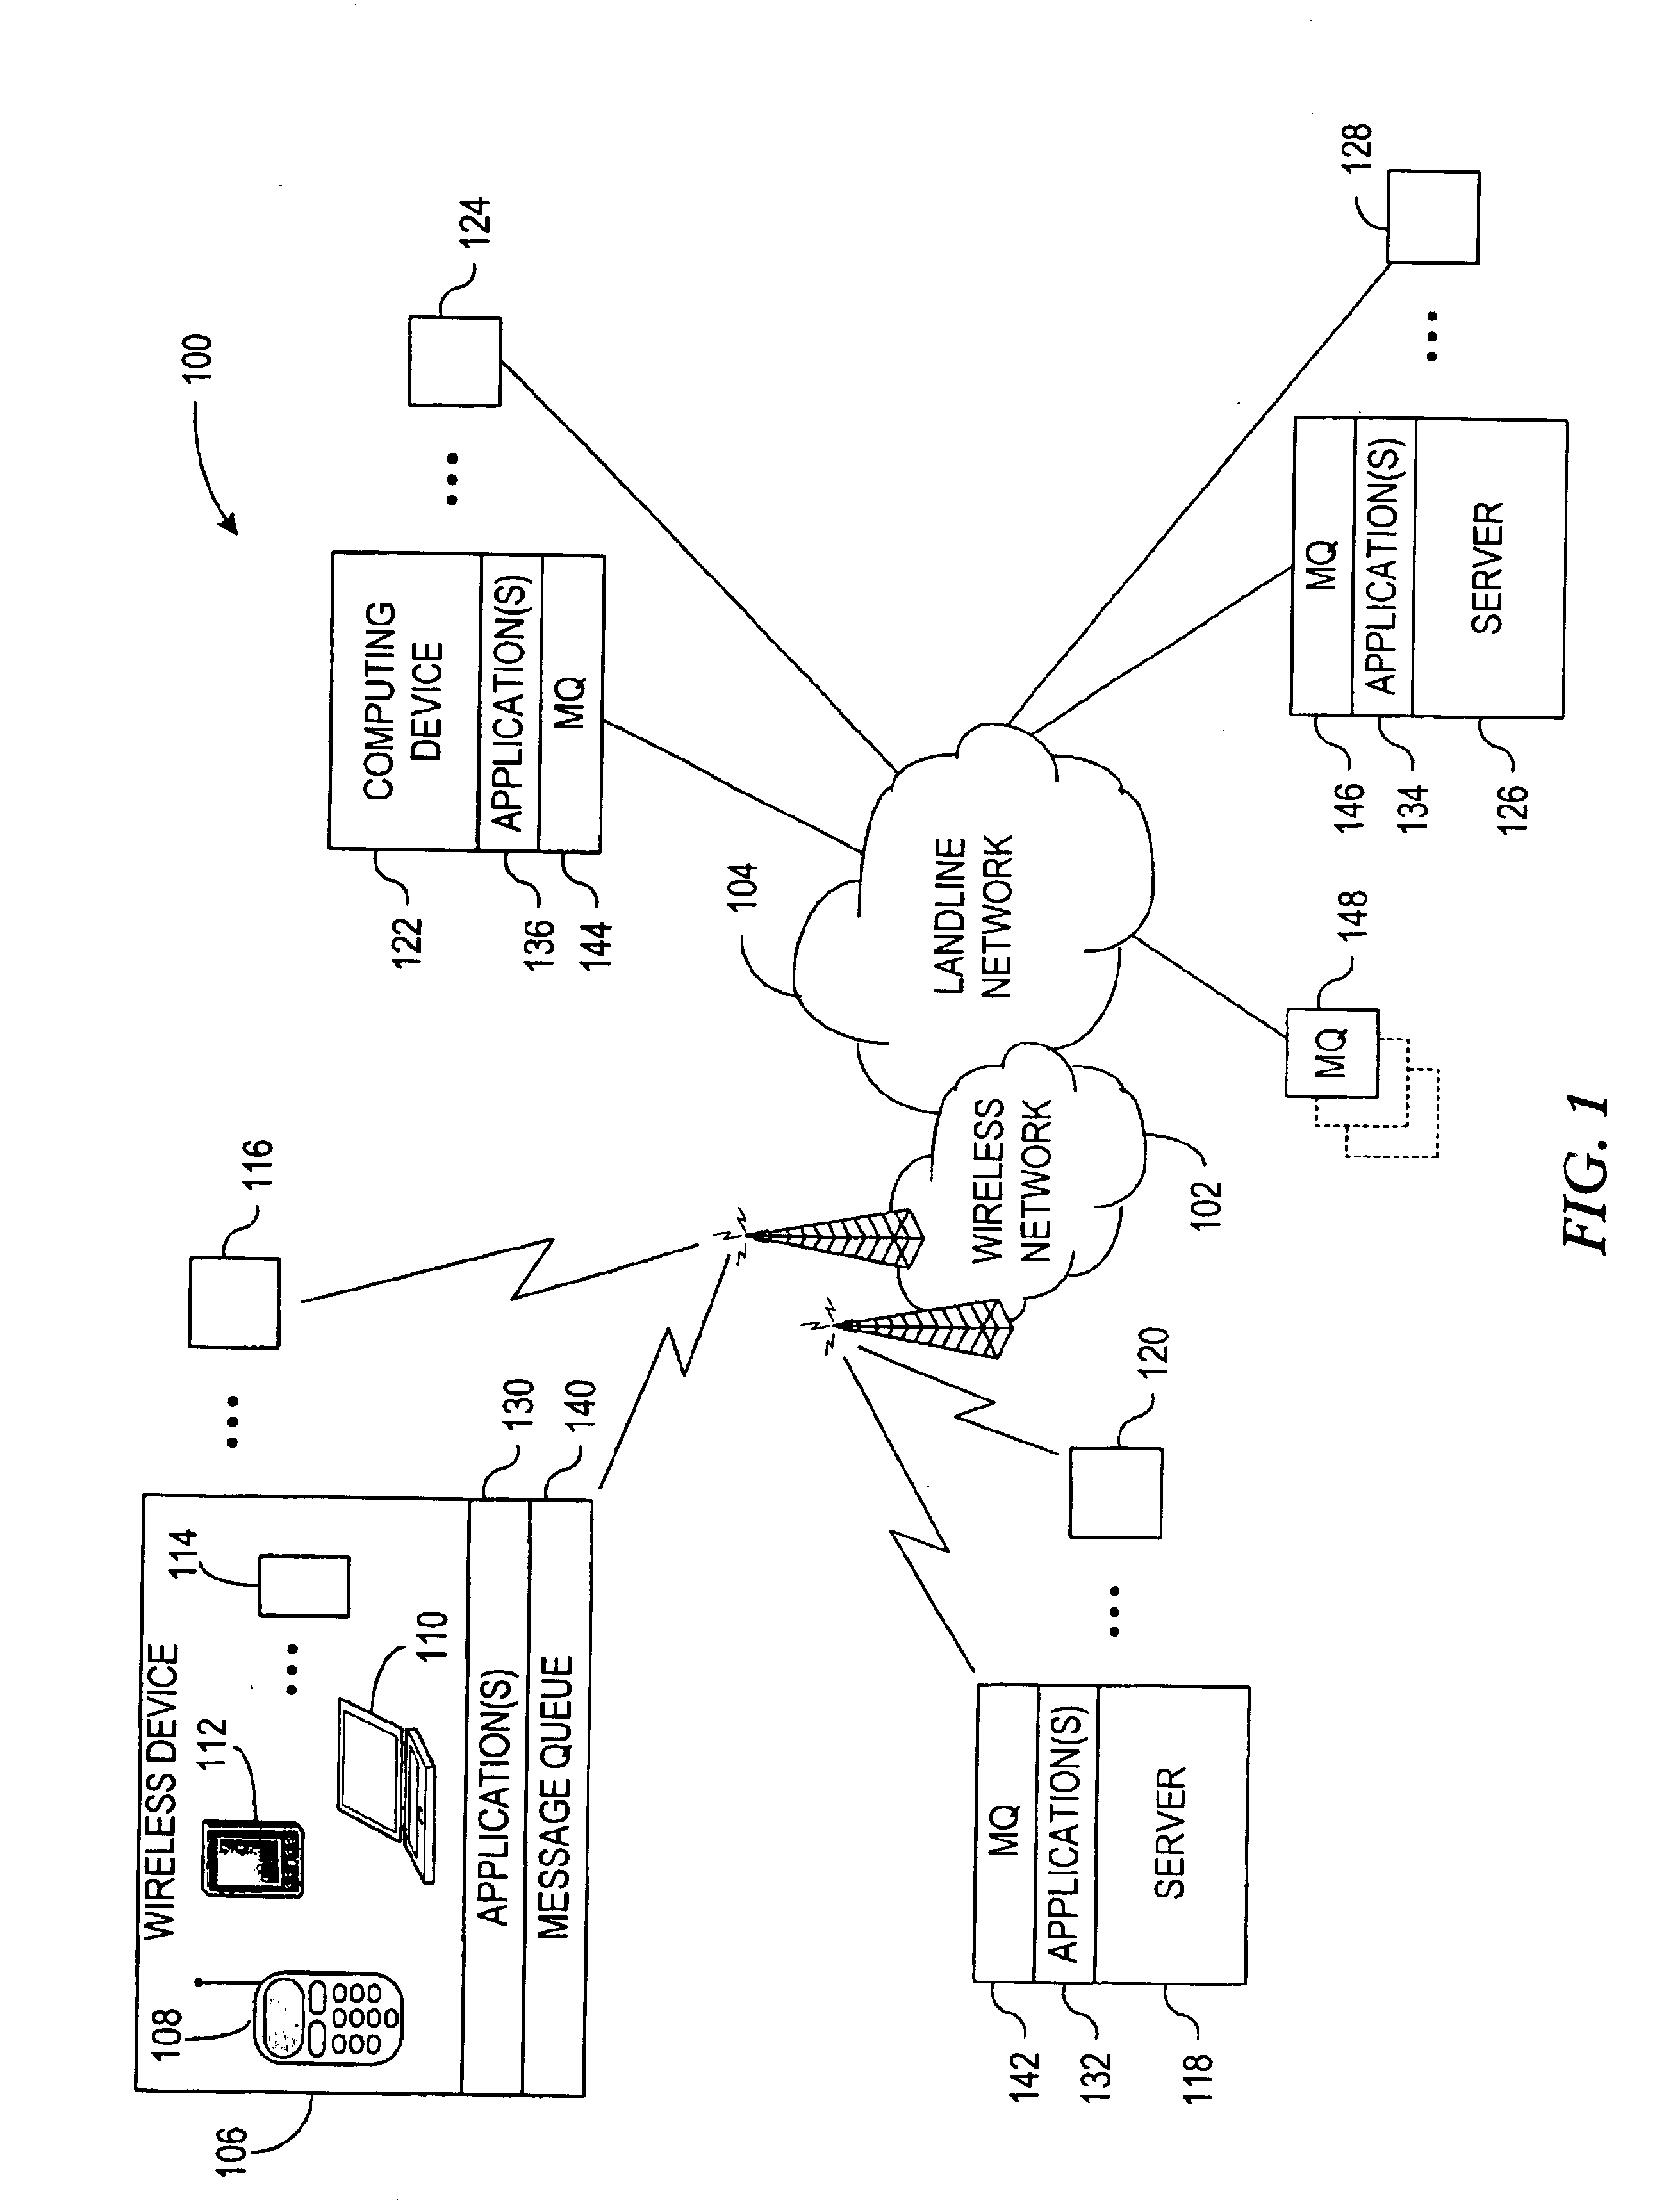 System and method for facilitating end-to-end quality of service in message transmissions employing message queues